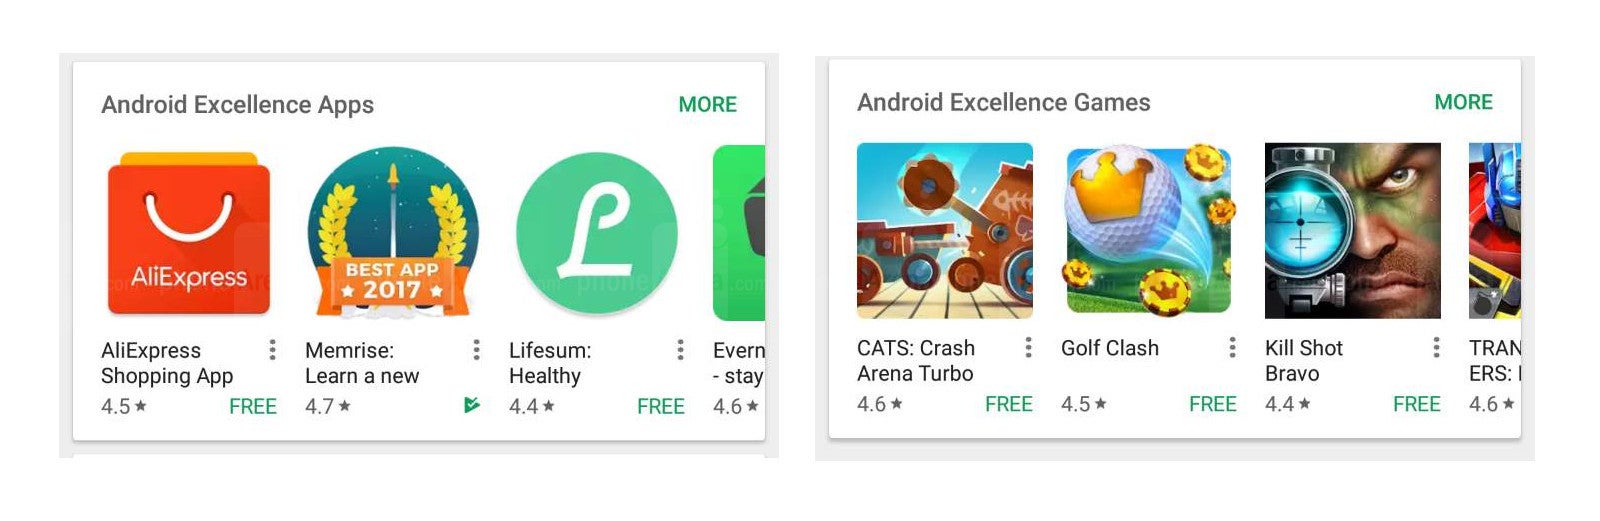 Android Excellence Apps and Games collections - Android Excellence is Google's answer to the new iOS 11 App Store